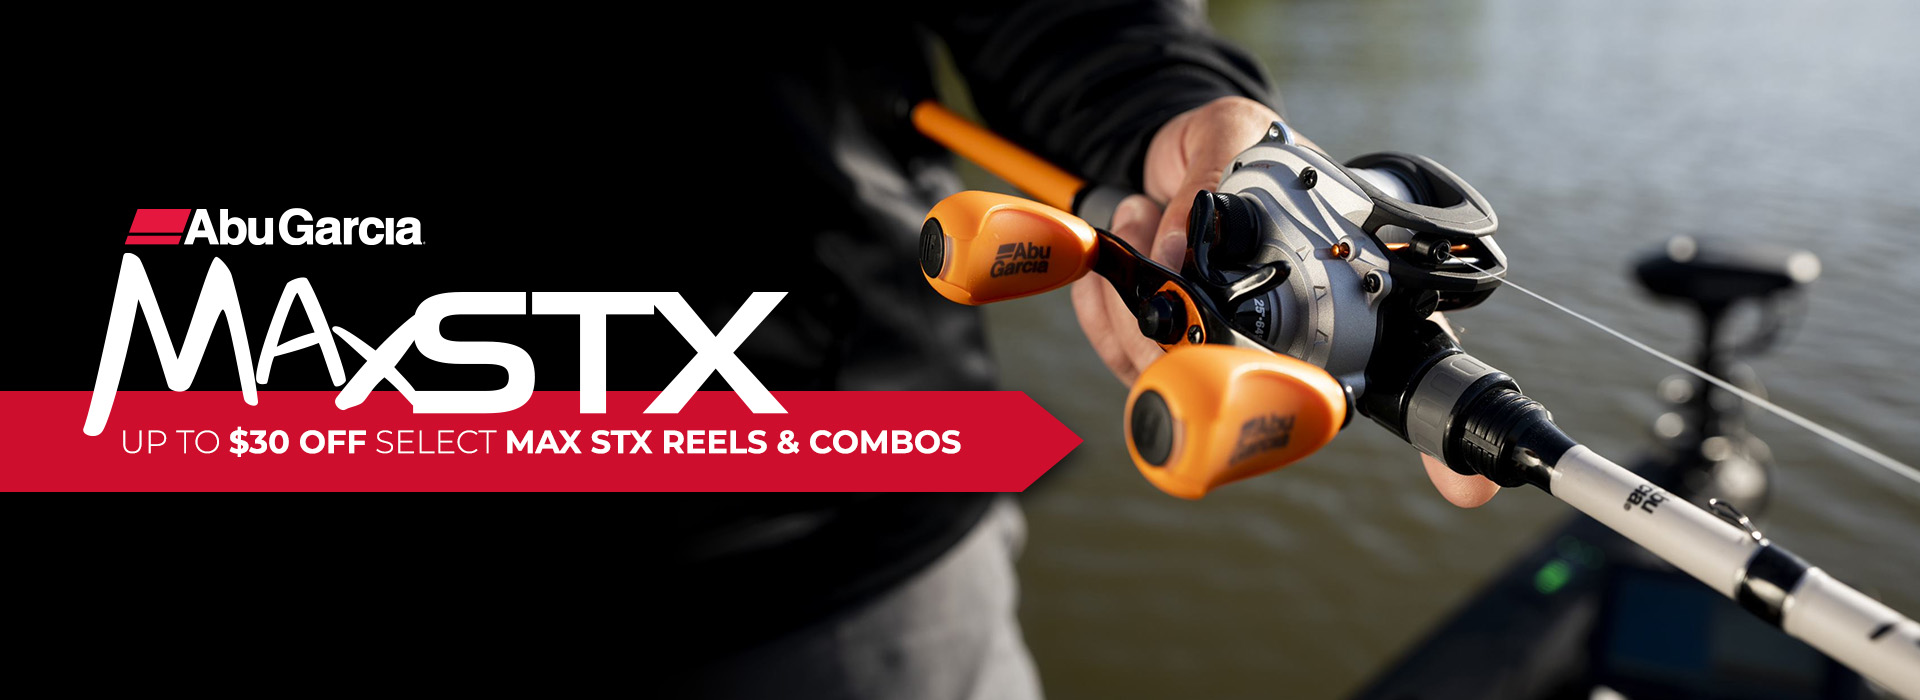 Up to $30 off select Max STX Reels & Combos